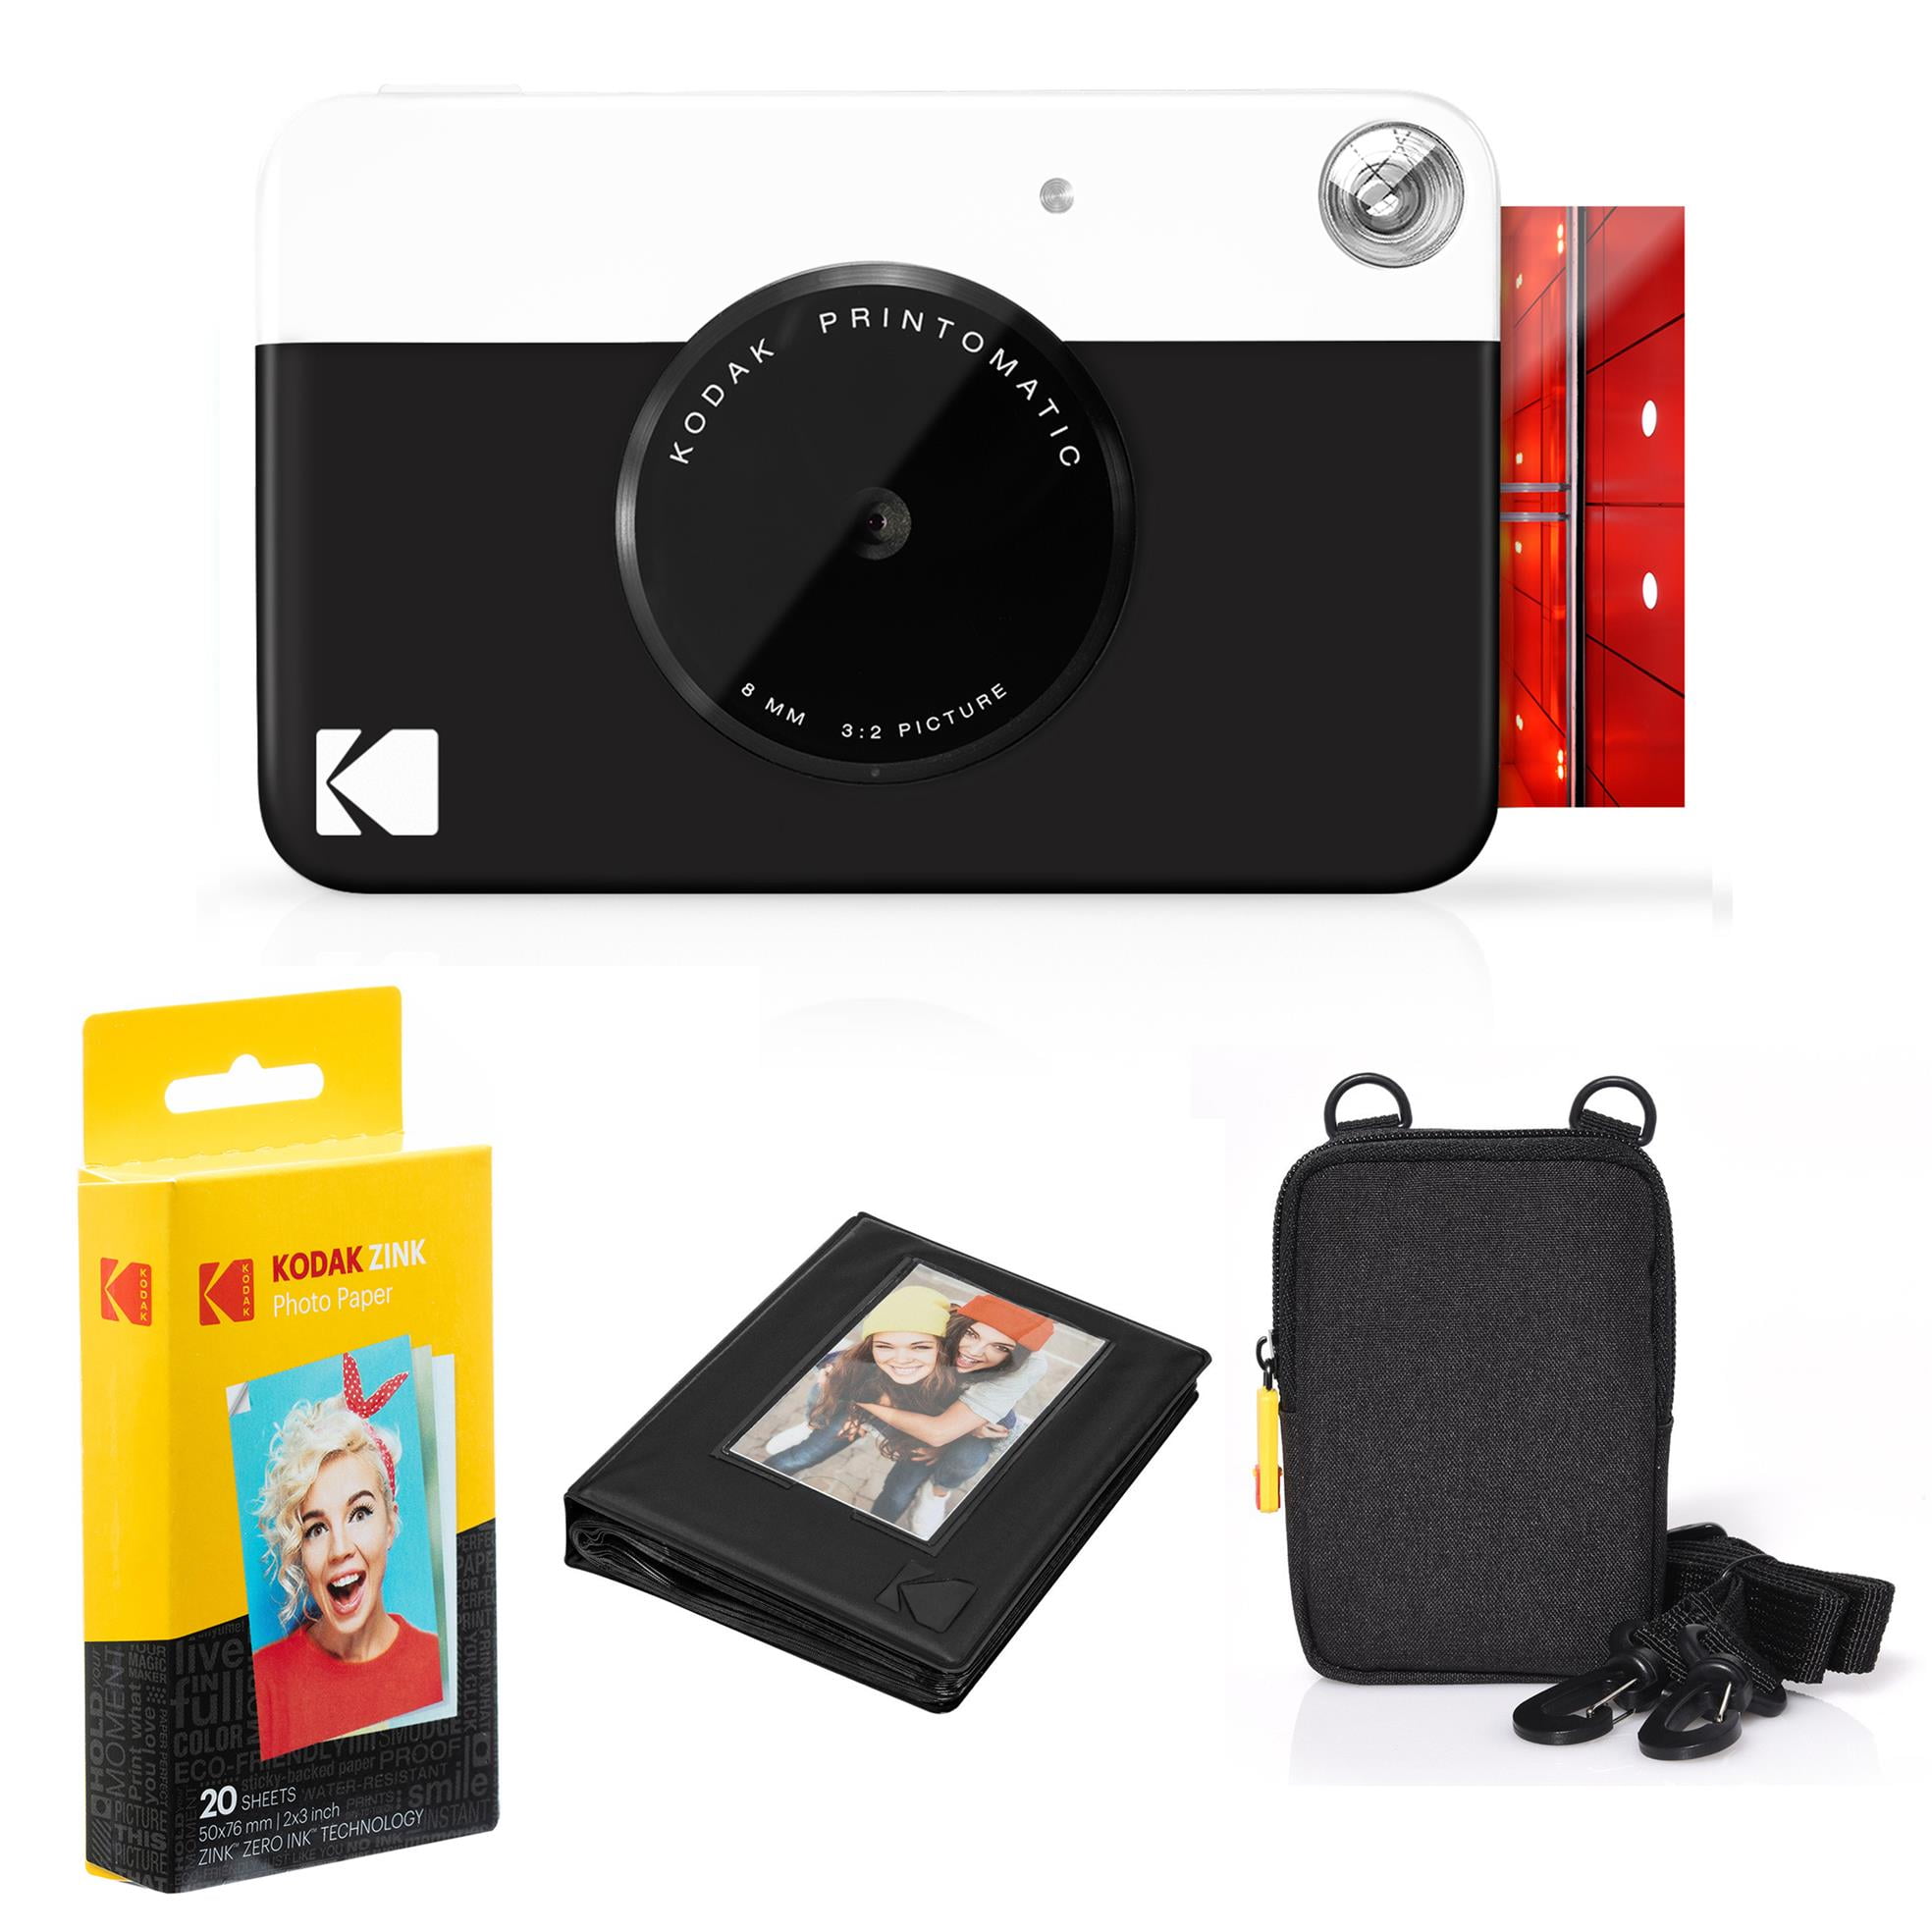 How many pictures does the Kodak Printomatic store without a microSD card?